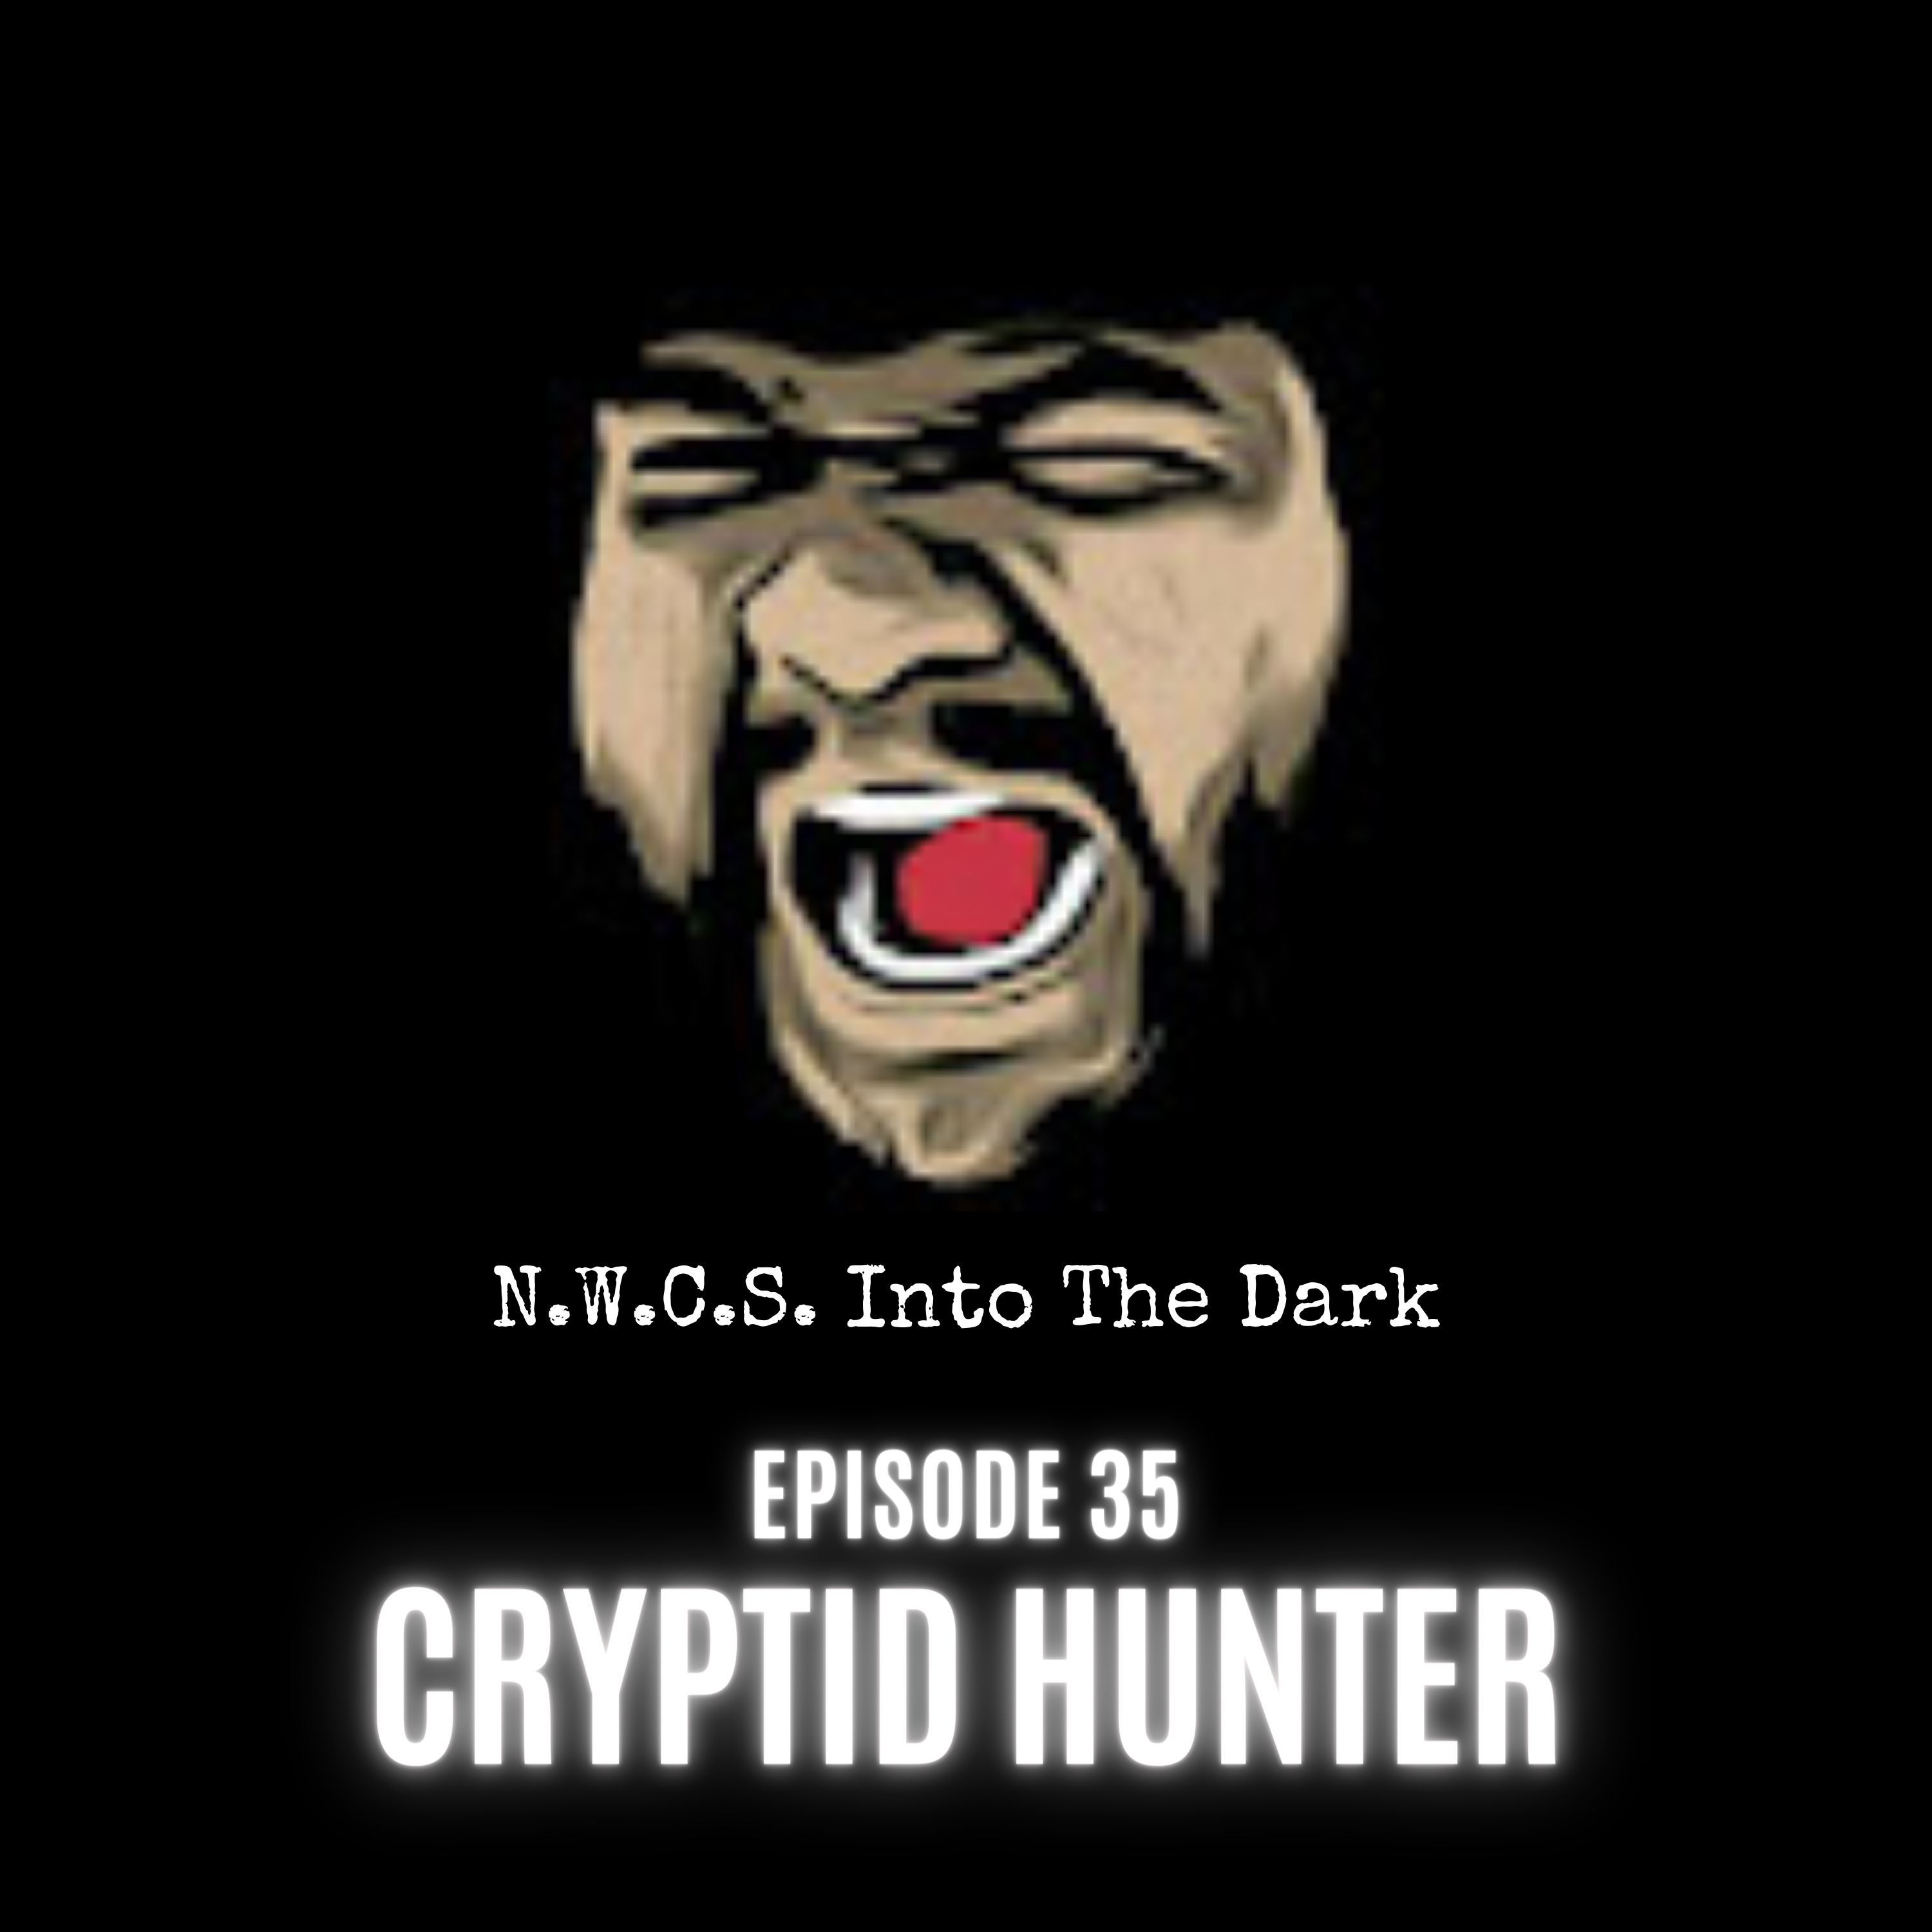 NWCS - Into The Dark - Episode 35 Cryptid Hunter